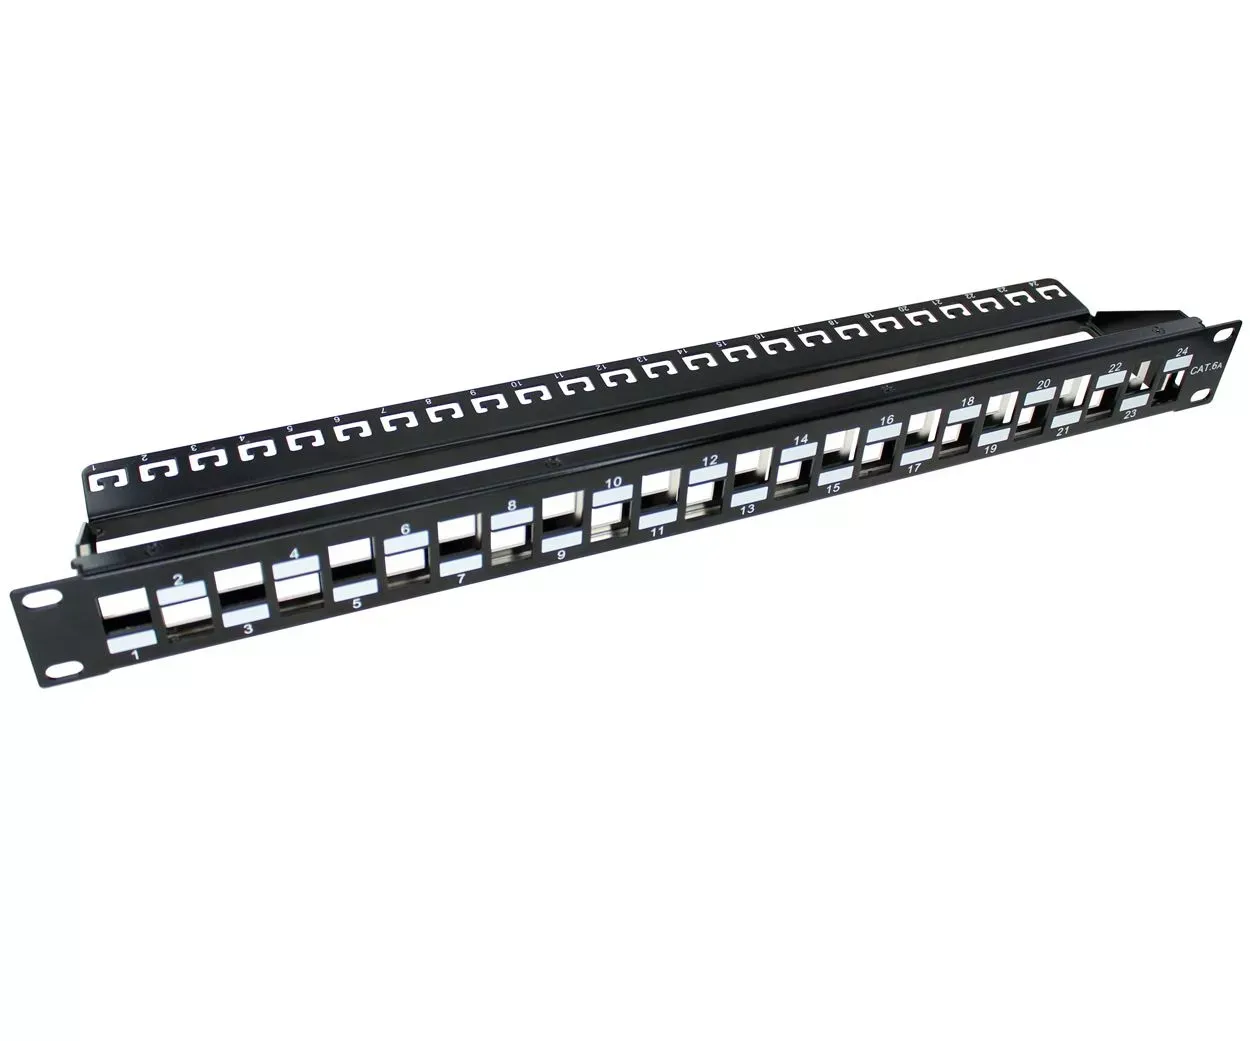 CAT 6A STAGGERED TYPE PATCH PANEL, MODELO: KSNT-24ABL-C6A, SKU: JQ0072, MARCA: KUWES